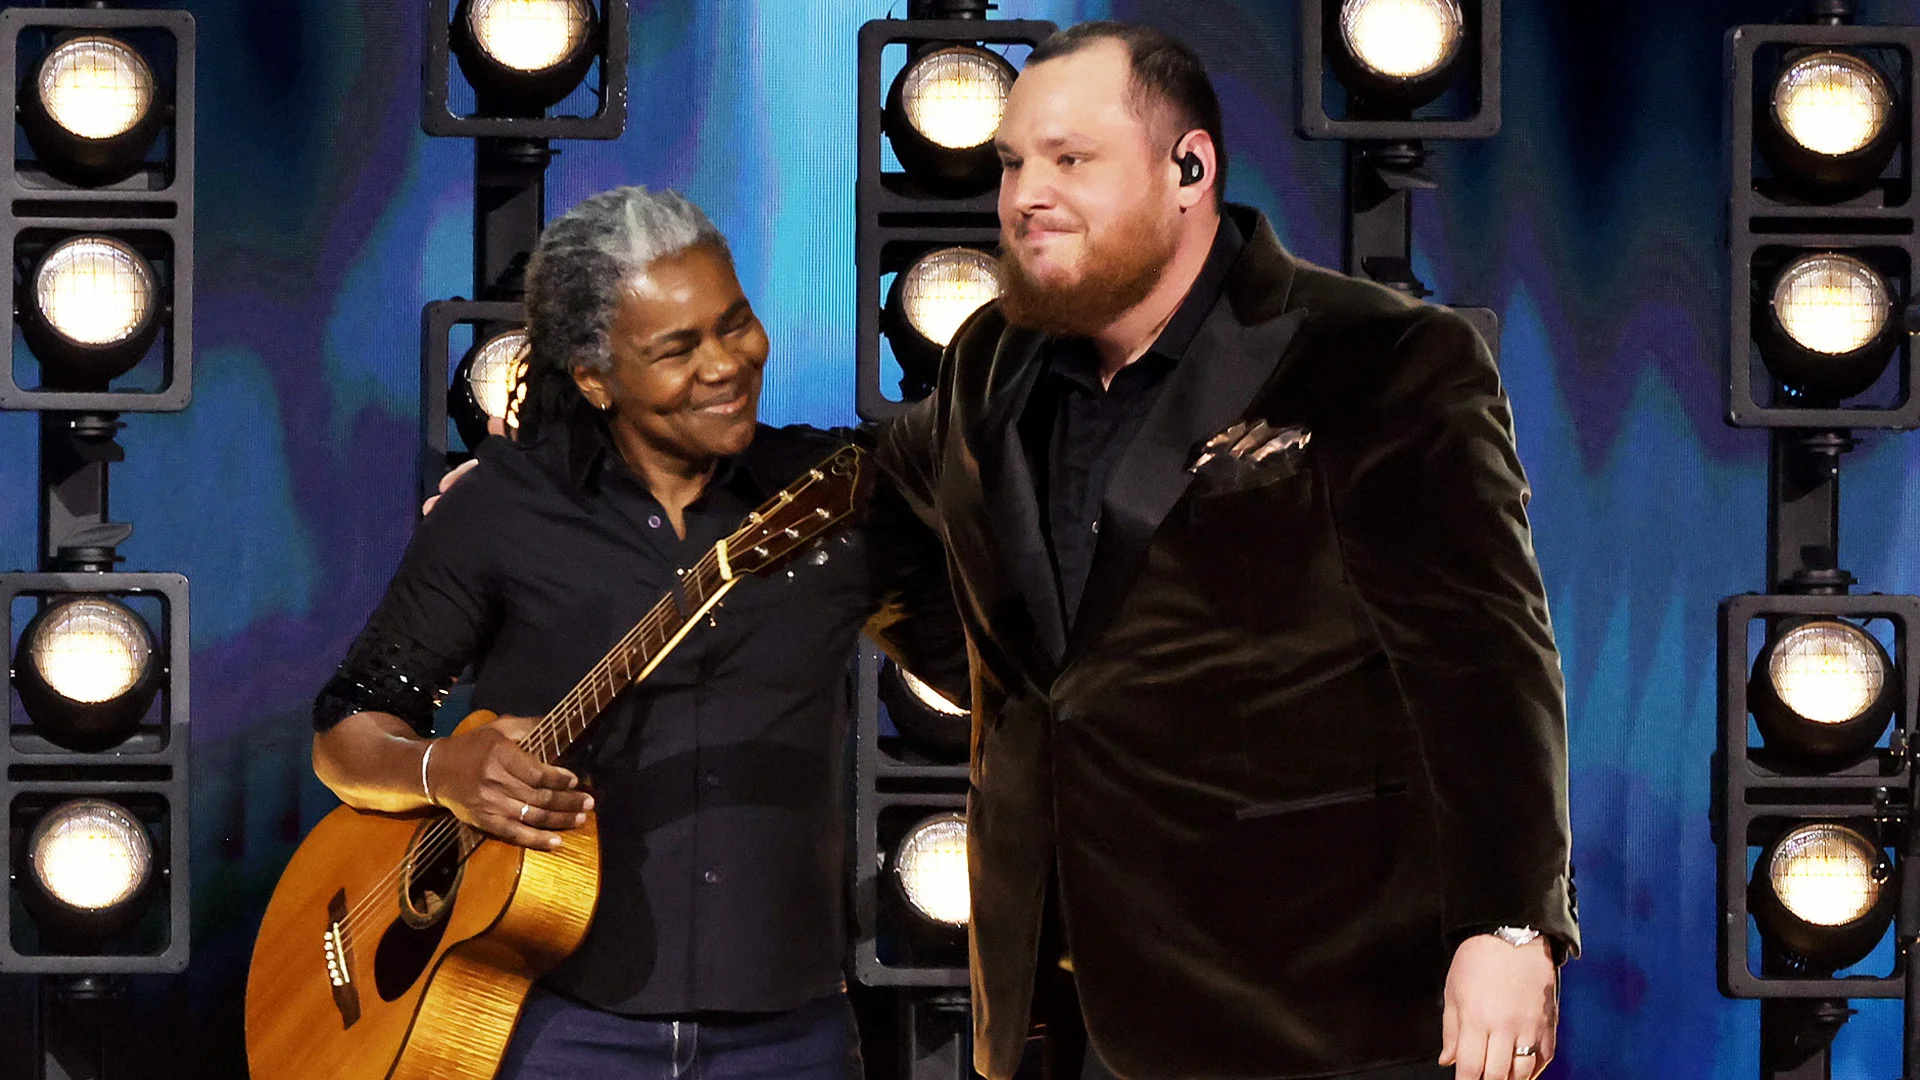 Tracy Chapman Performs Hit Song "Fast Car" with Luke Combs